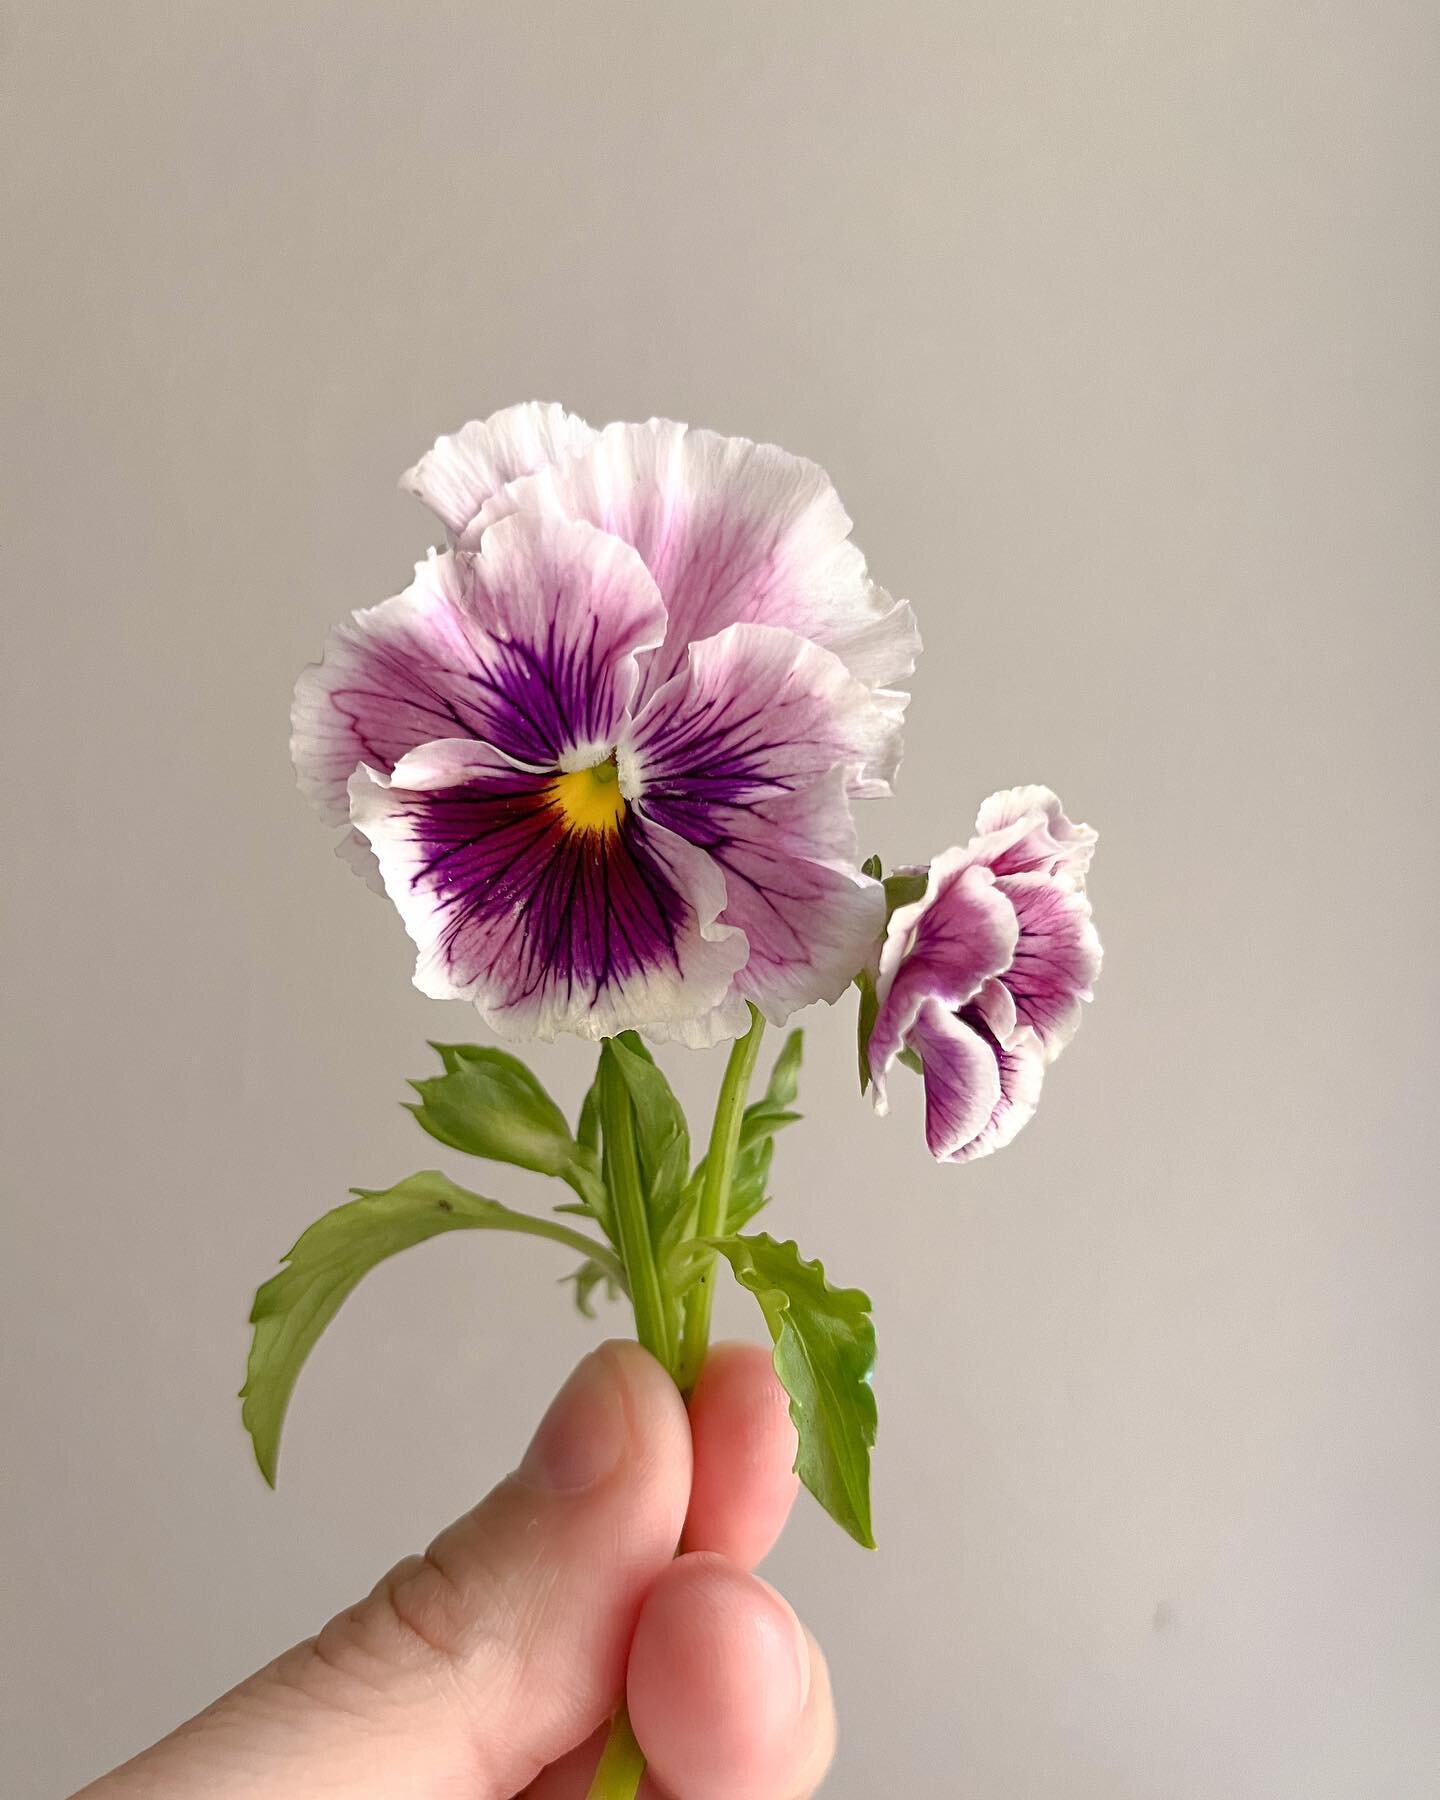 I could not love these ruffly Italian violas more! If it&rsquo;s tiny and twee, I WANT IT. 

@farmerbaileyplugs @gro.n.sell 

#gardeninspiredfloristry #gardengathered  #cottageflowers #gardenstyleflorist #cottagegarden #americangrownflowers #houstonf